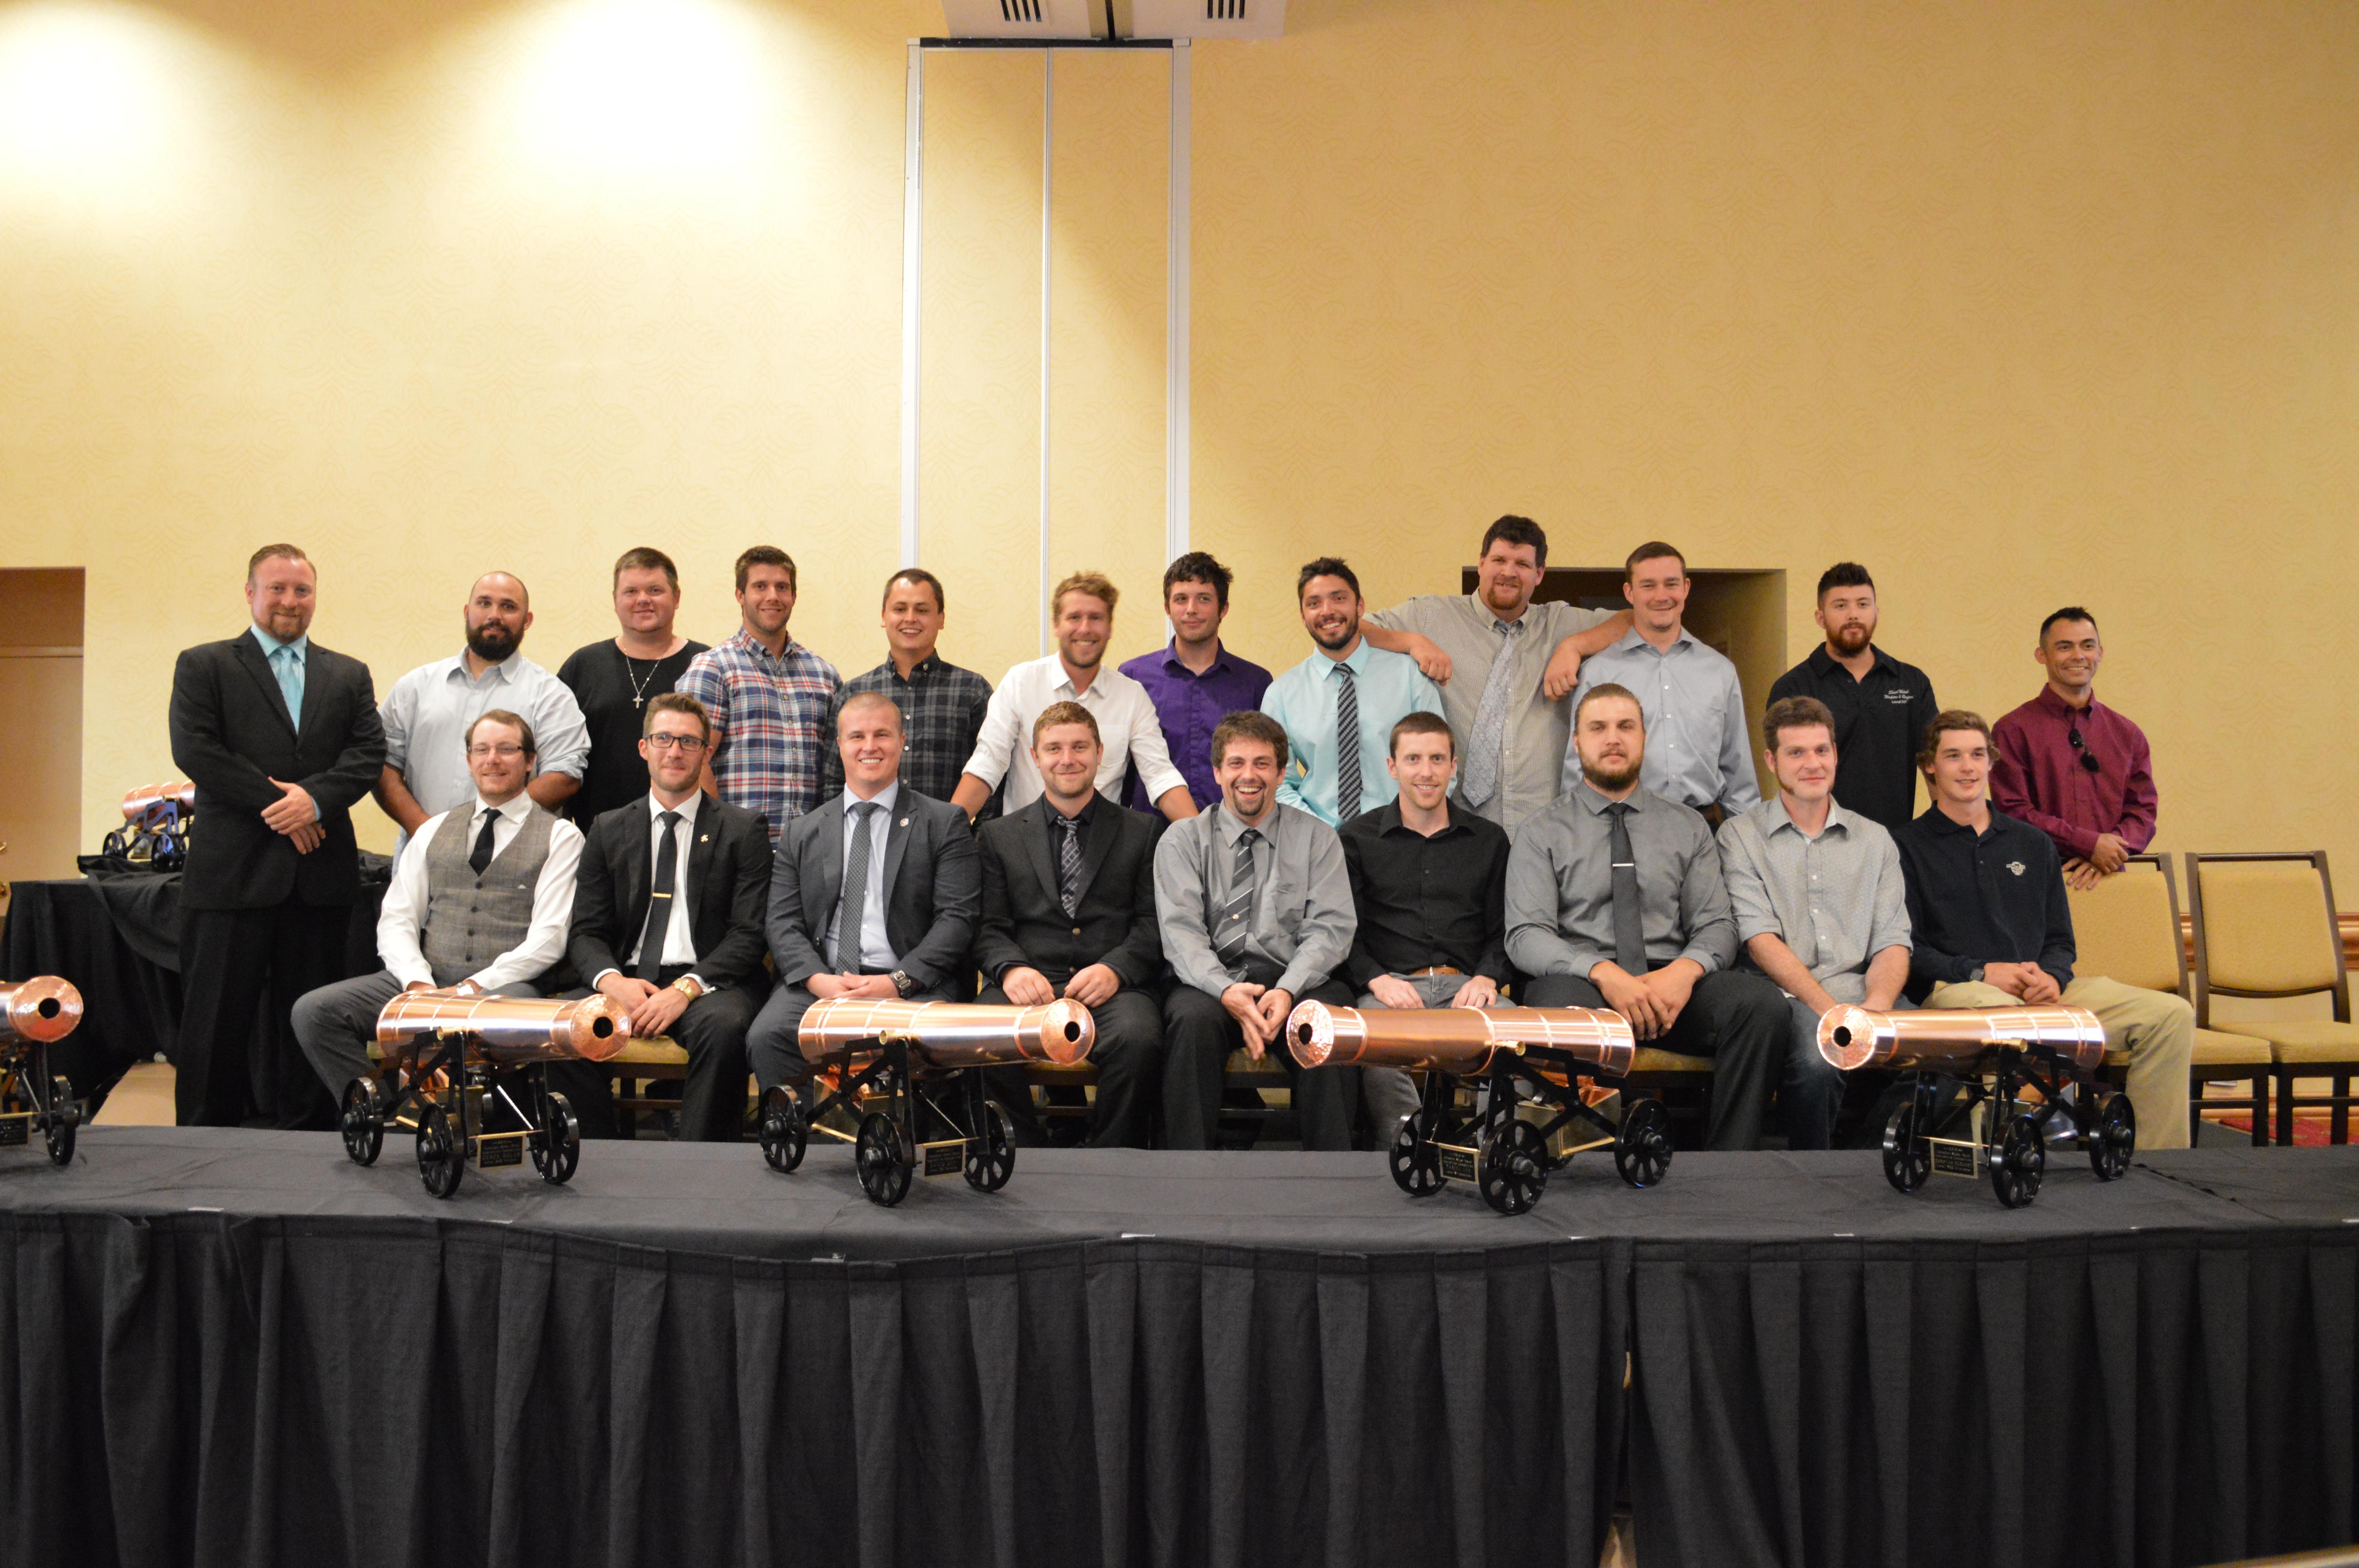 Apprentices from across Canada who competed in the Annual Canadian Council Convention for both the sheet metal and roofing competitions